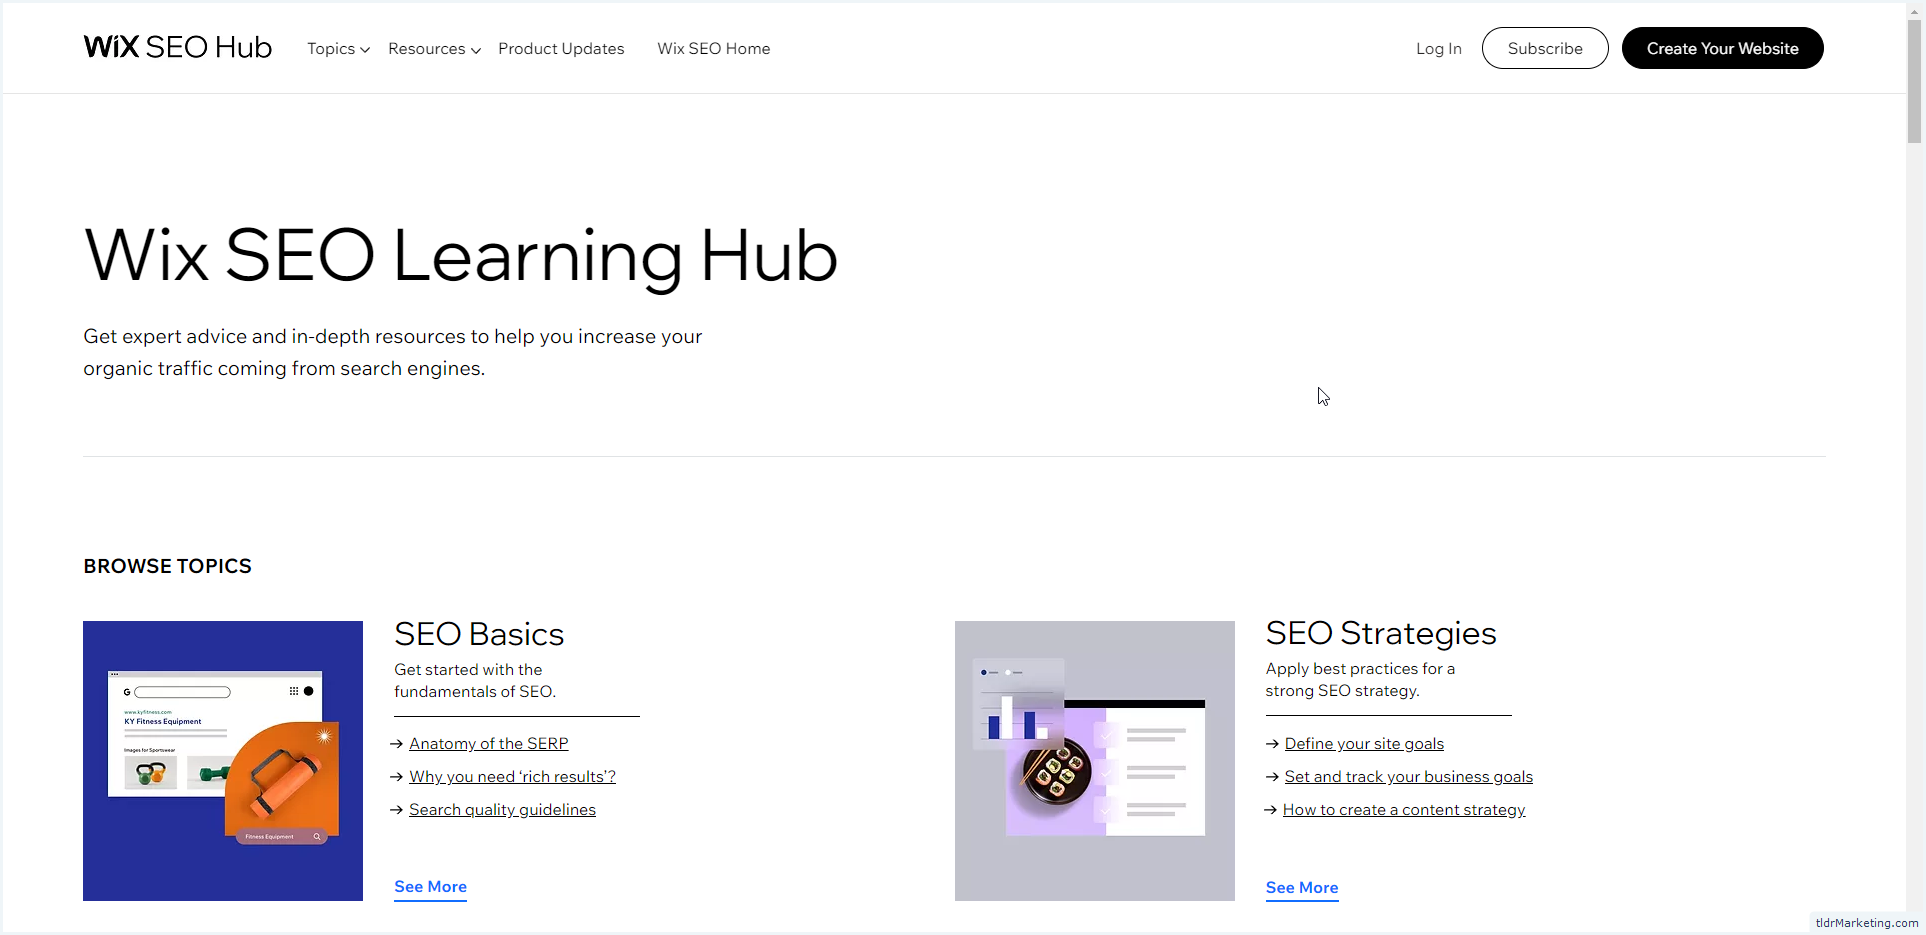 Wix Launches an SEO Learning Hub